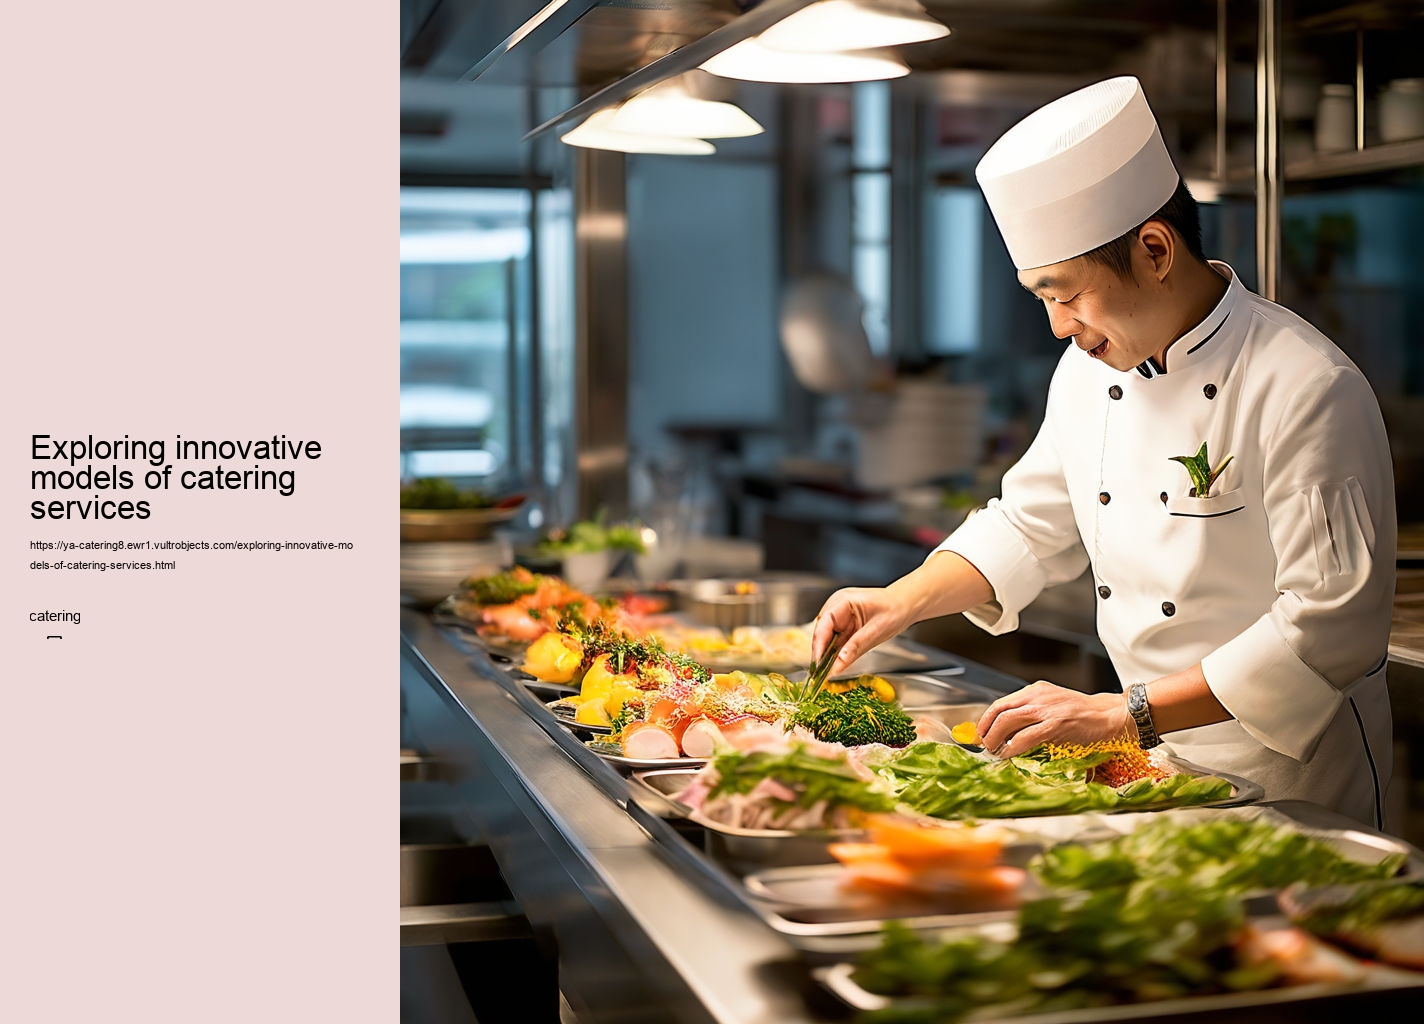 Exploring innovative models of catering services